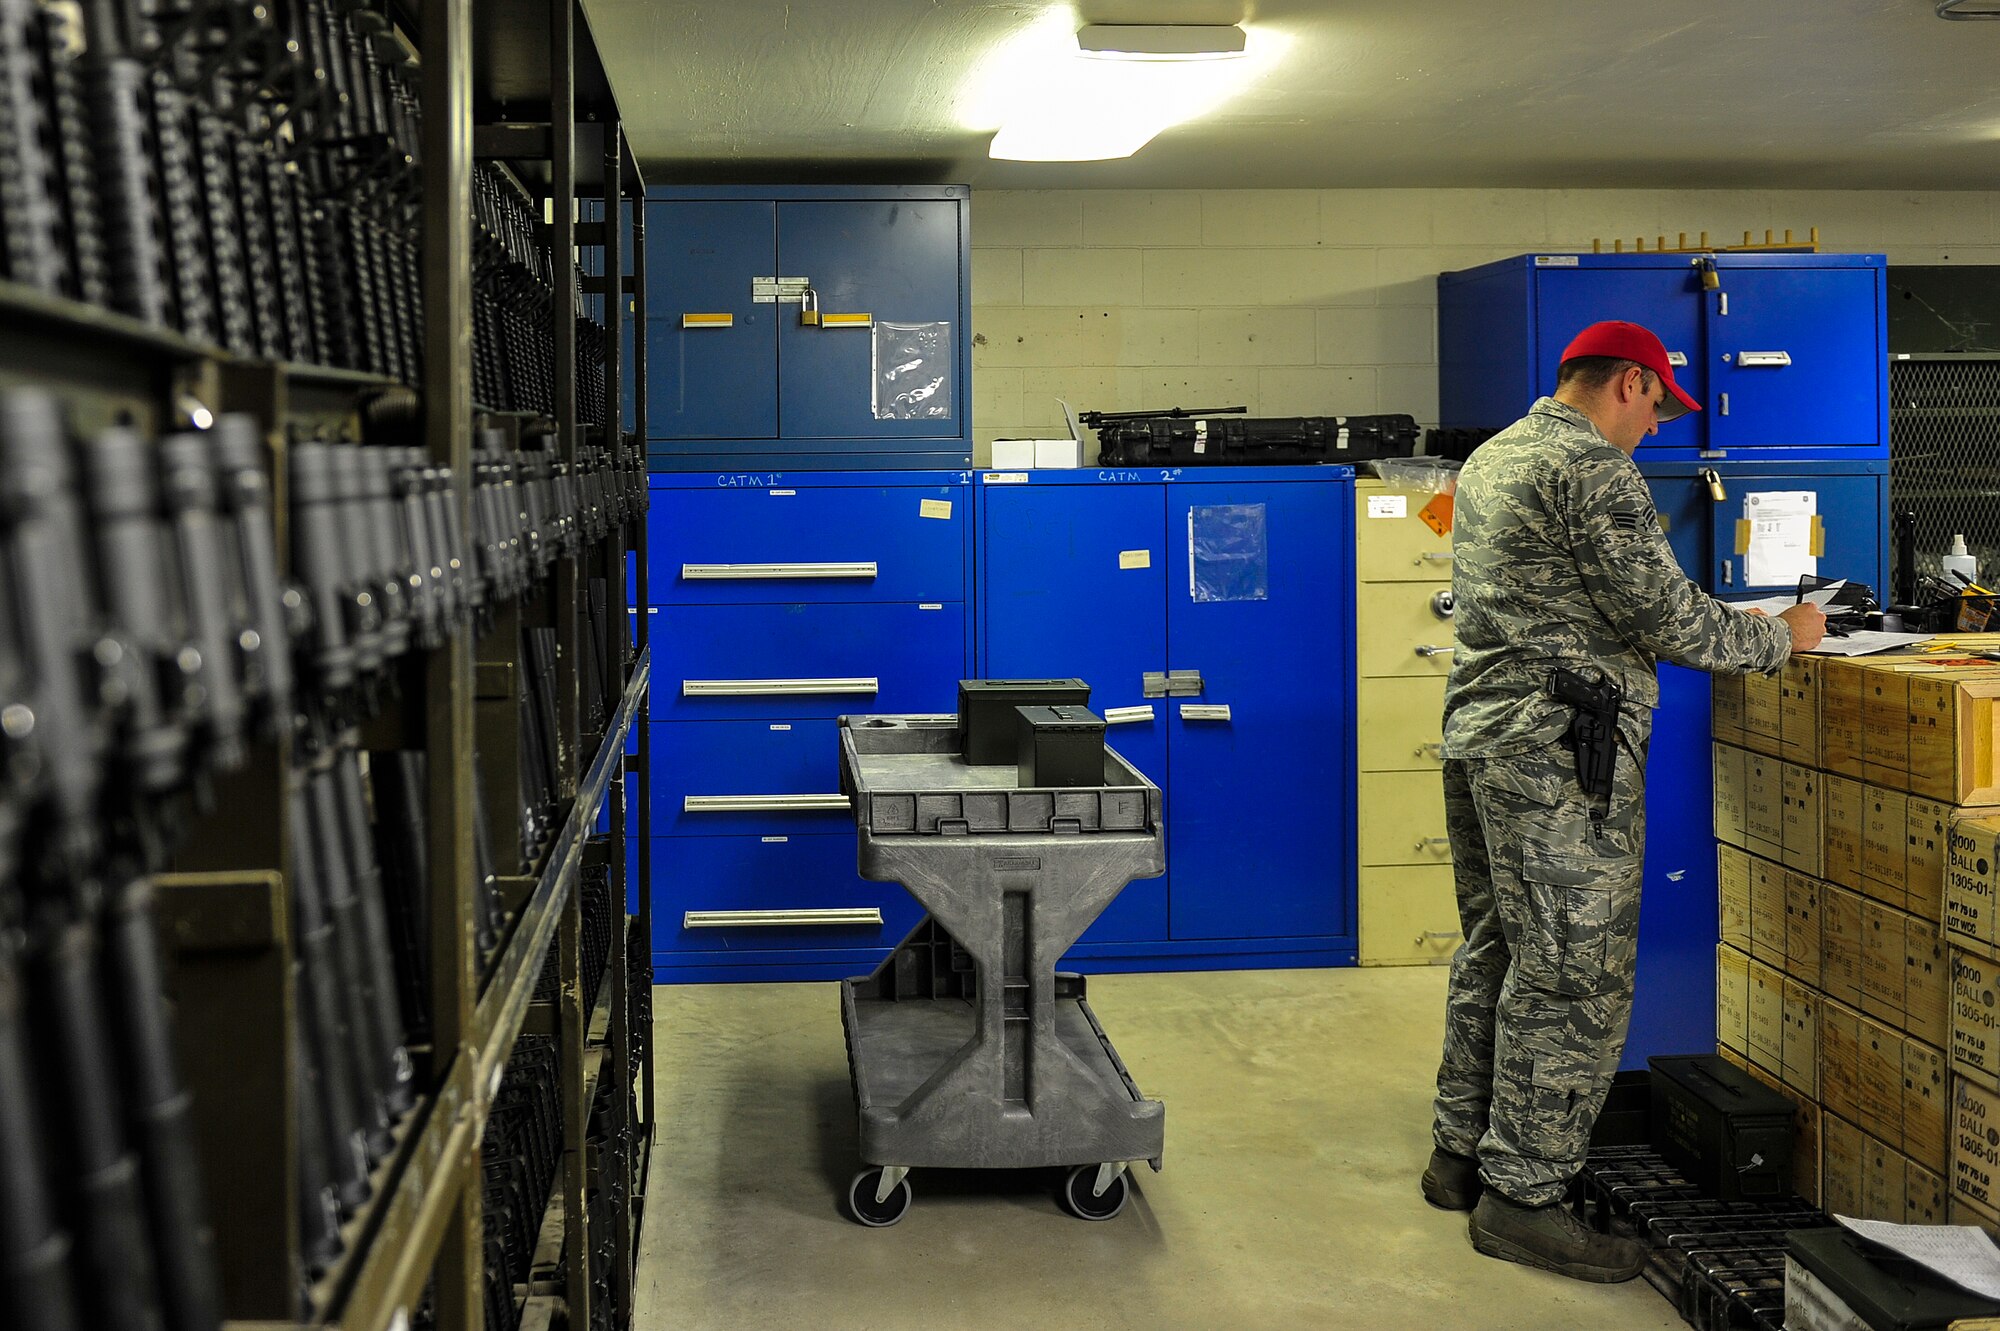 Senior Airman Christopher Crawley, 1st Special Operations Security Forces Squadron Combat Arms Training and Maintenance instructor, returns ammo to the CATM armory at Hurlburt Field, Fla., December 2, 2014. CATM instructors provide firing training and maintain all weapons used by CATM and Security Forces. (U.S. Air Force photo/Airman 1st Class Jeff Parkinson)